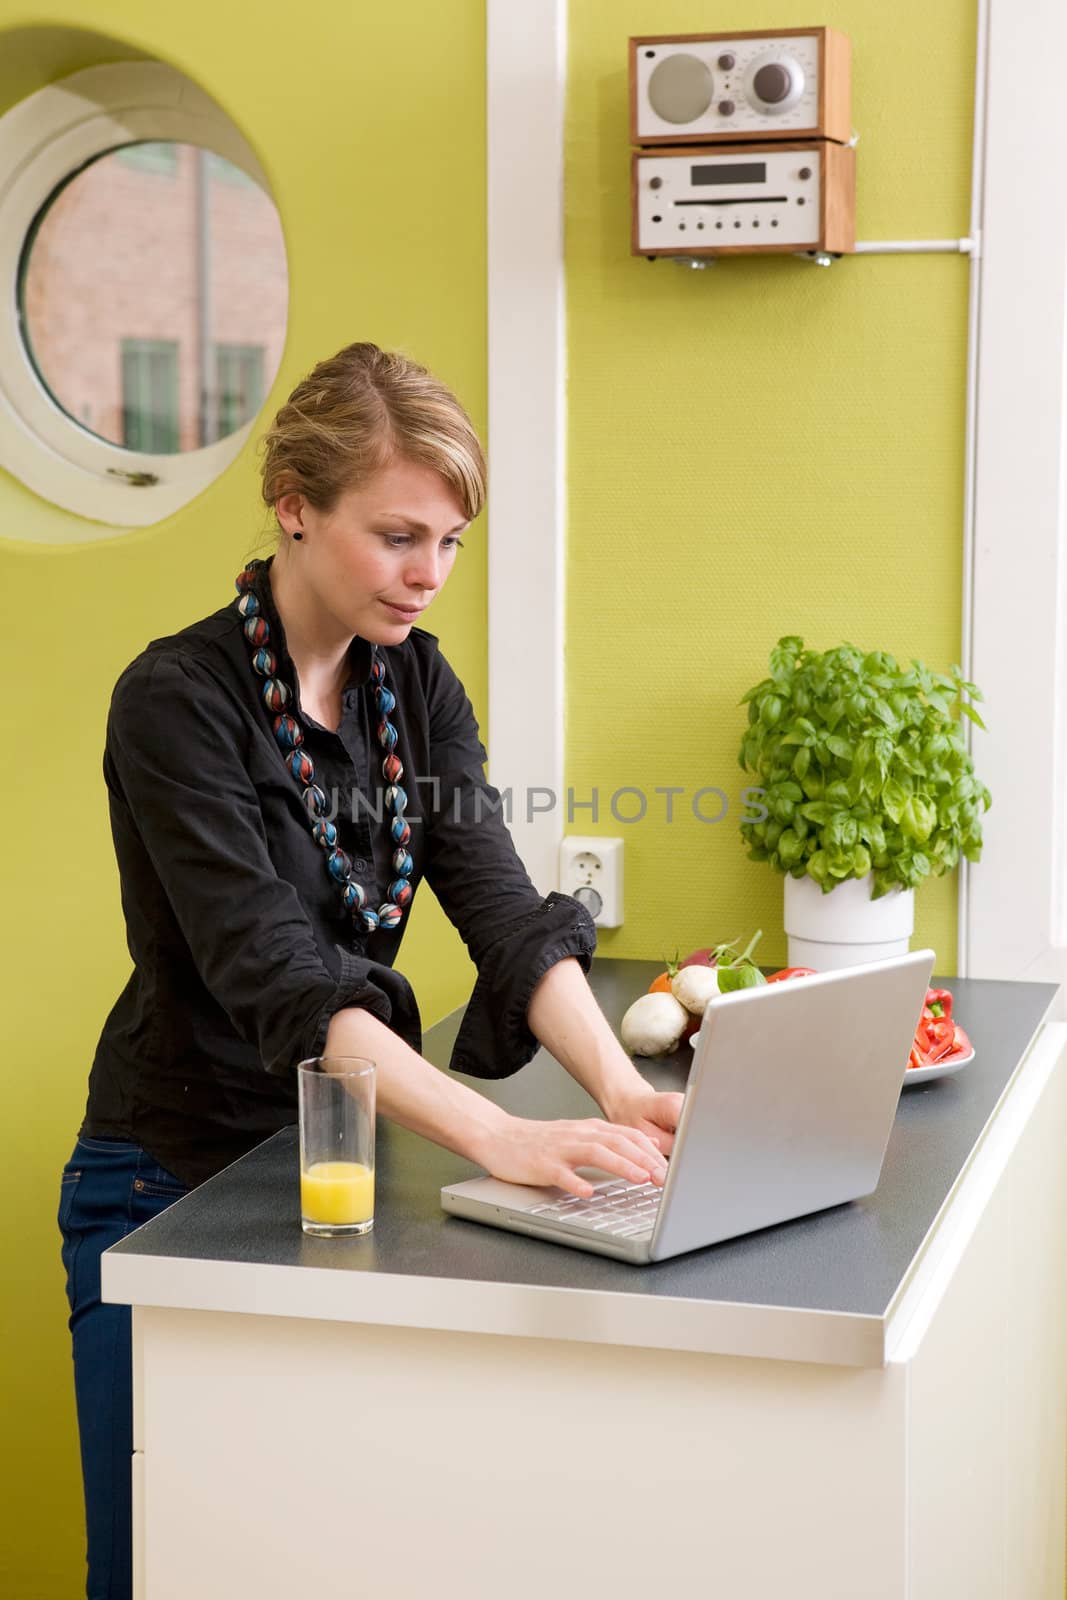 A female uses the computer on the kitchen counter while having a light snack of vegetables